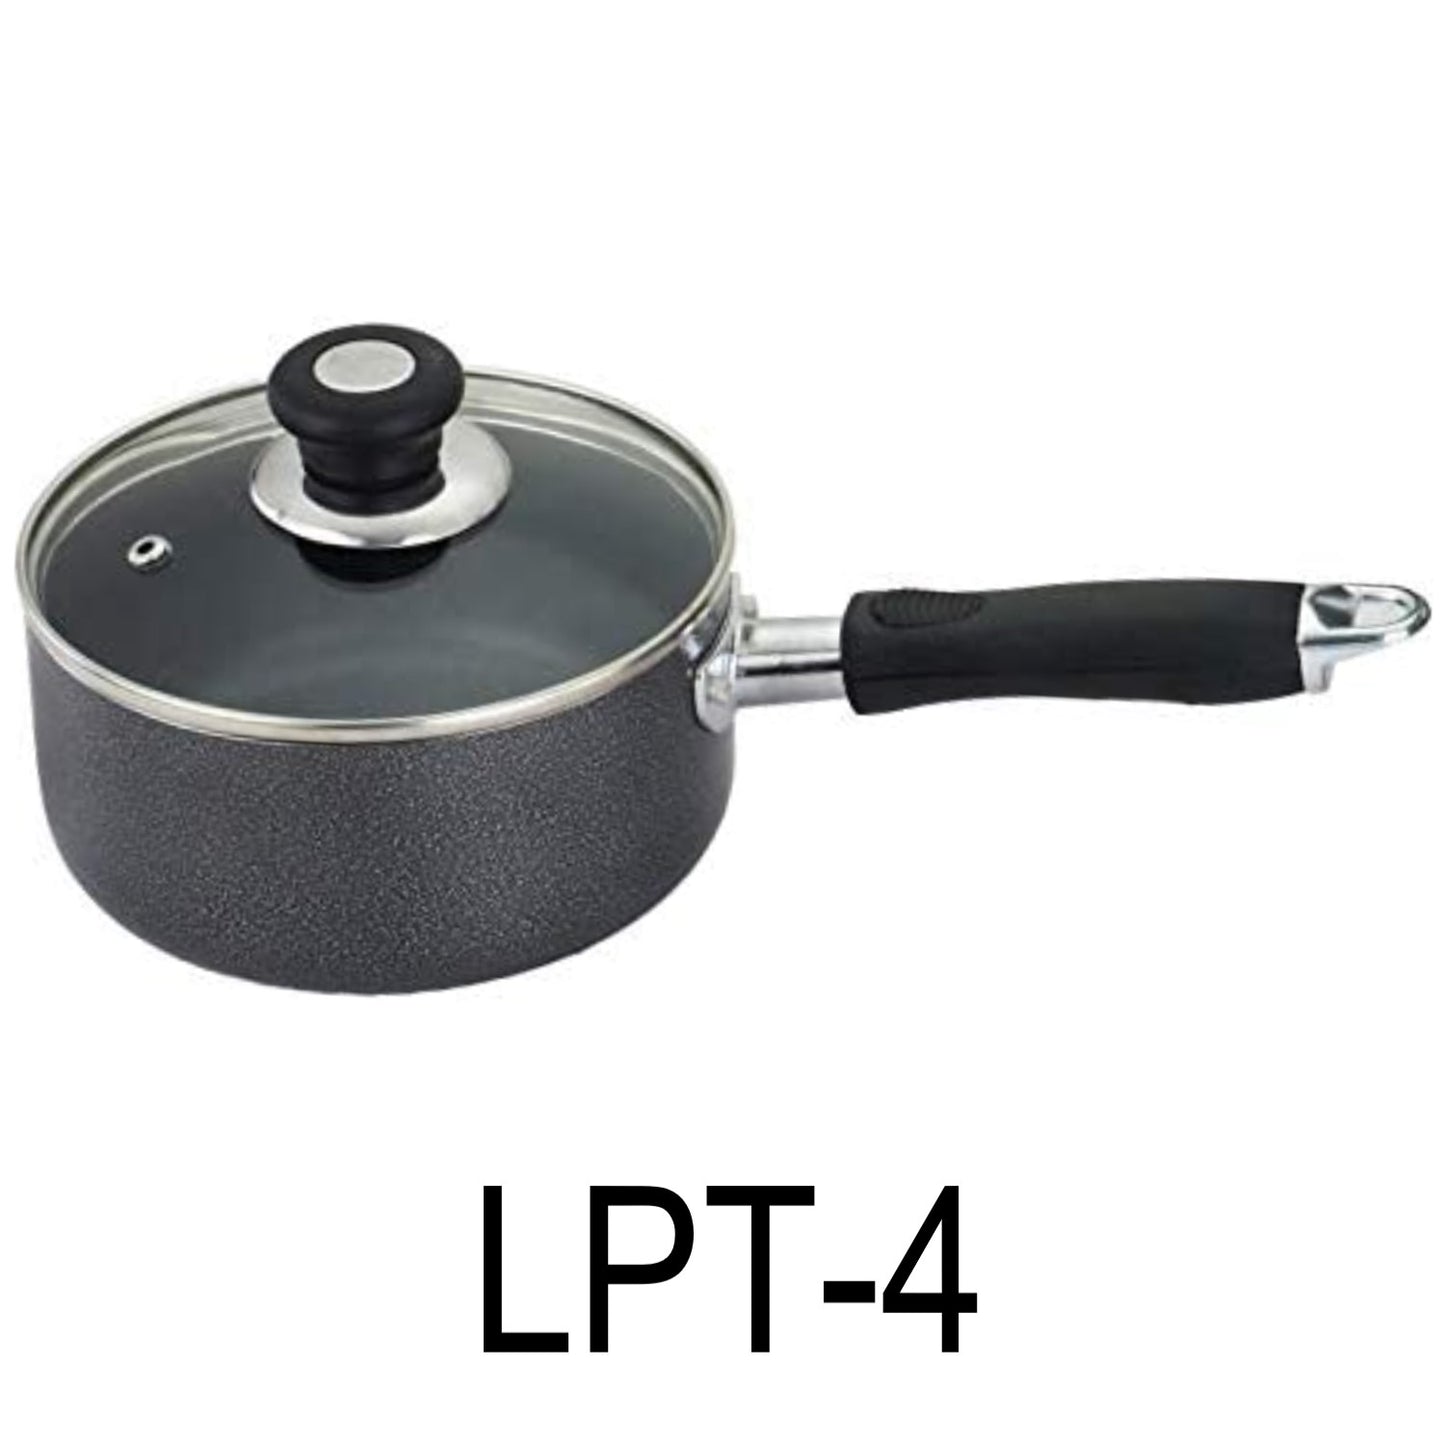 14 Low Pot Non Stick Heavy Gauge With Glass Lid – R & B Import